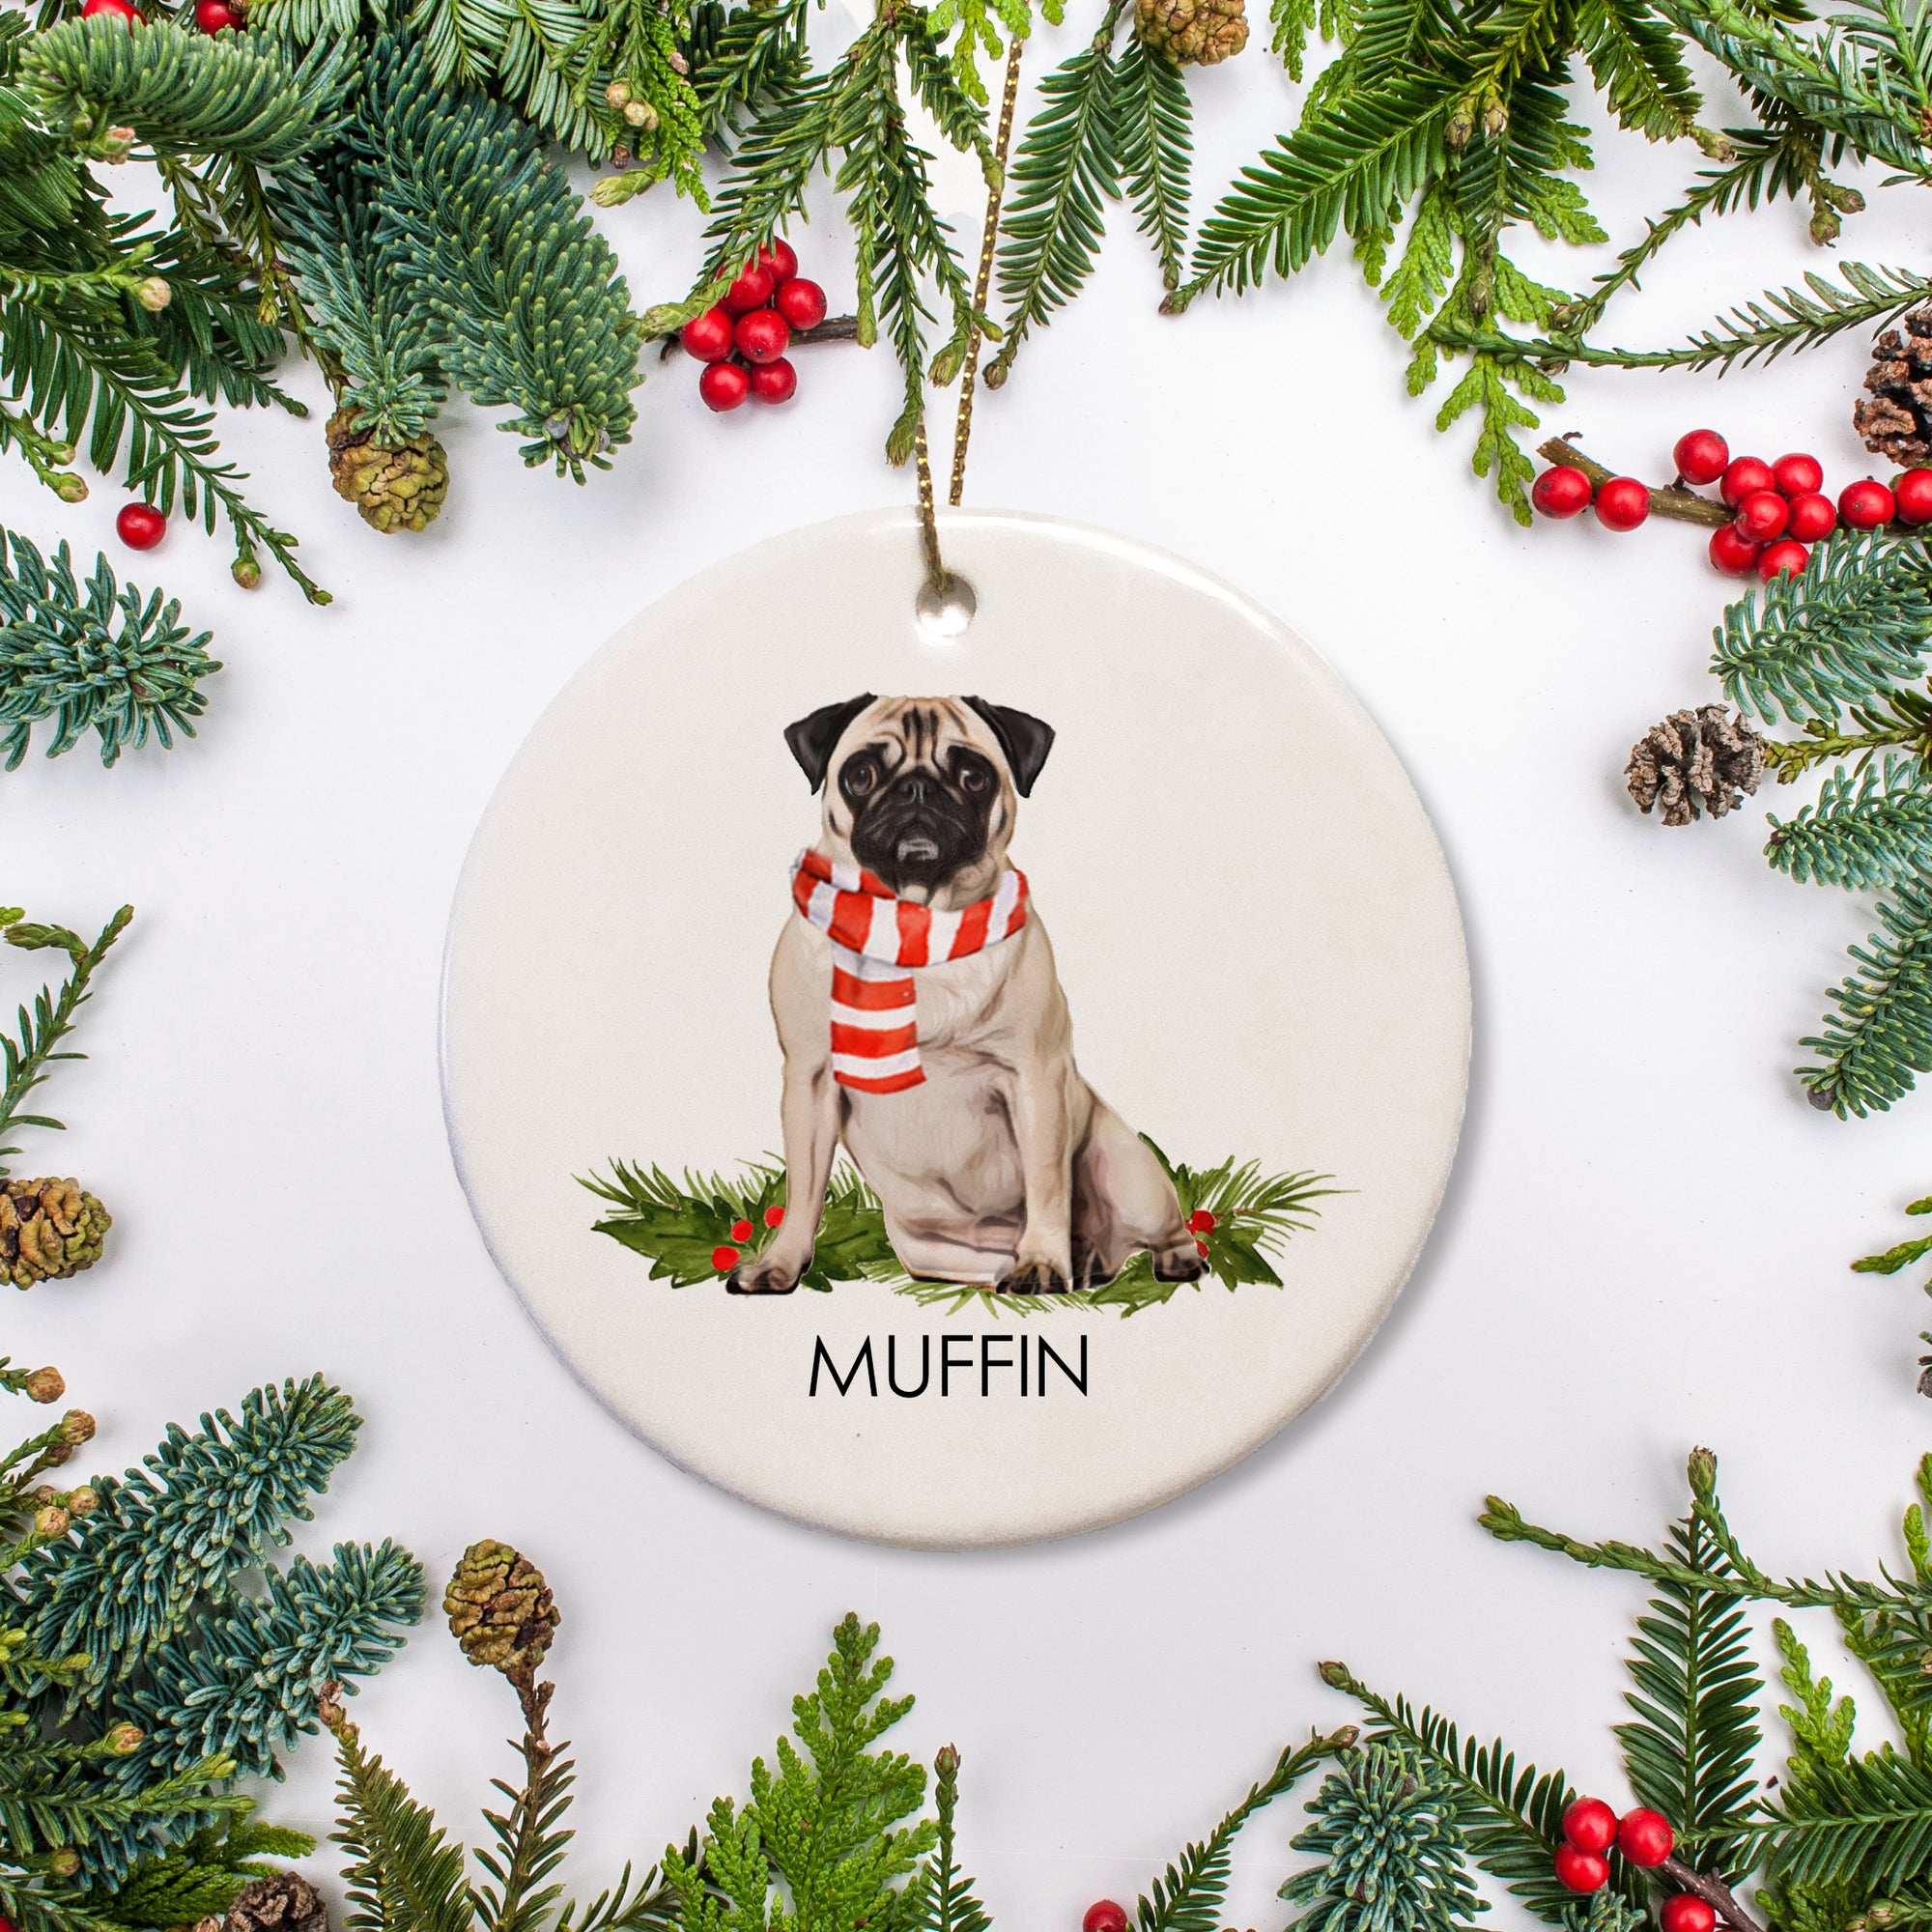 fawn colored pug christmas ornament, personalized on ceramic